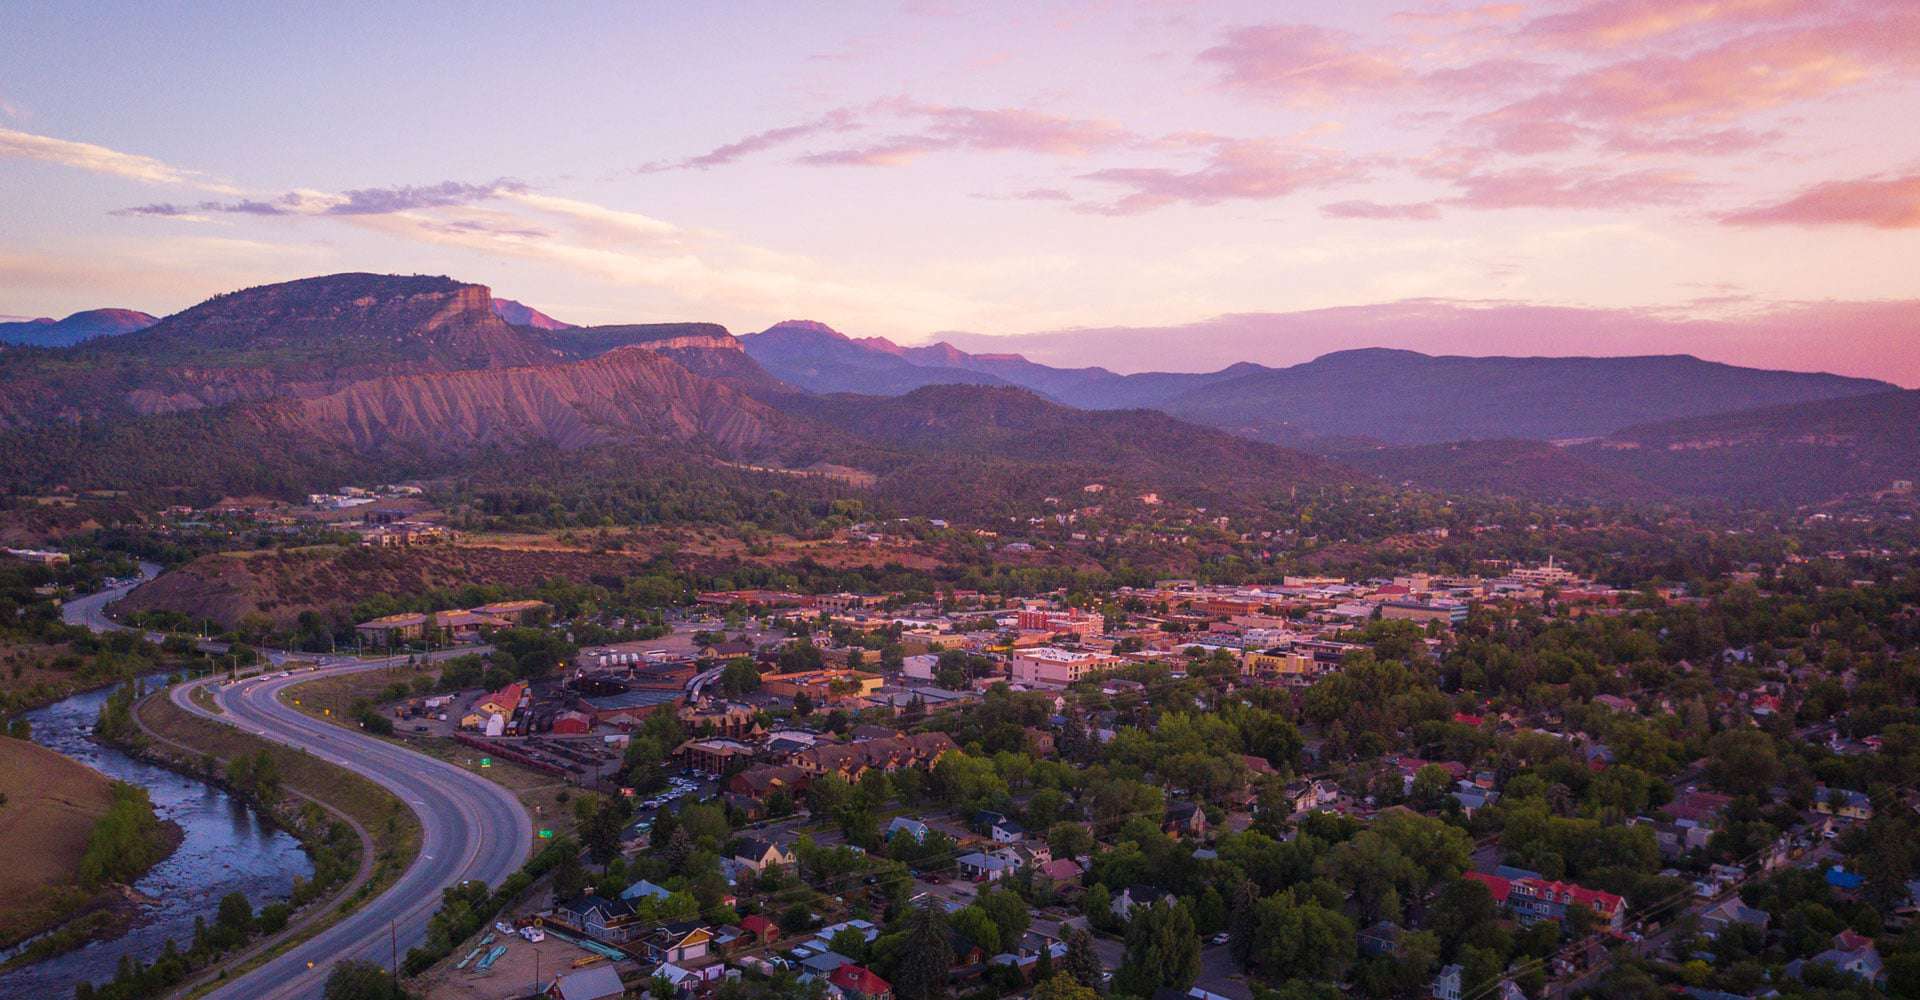 Downtown Durango and the North Main District